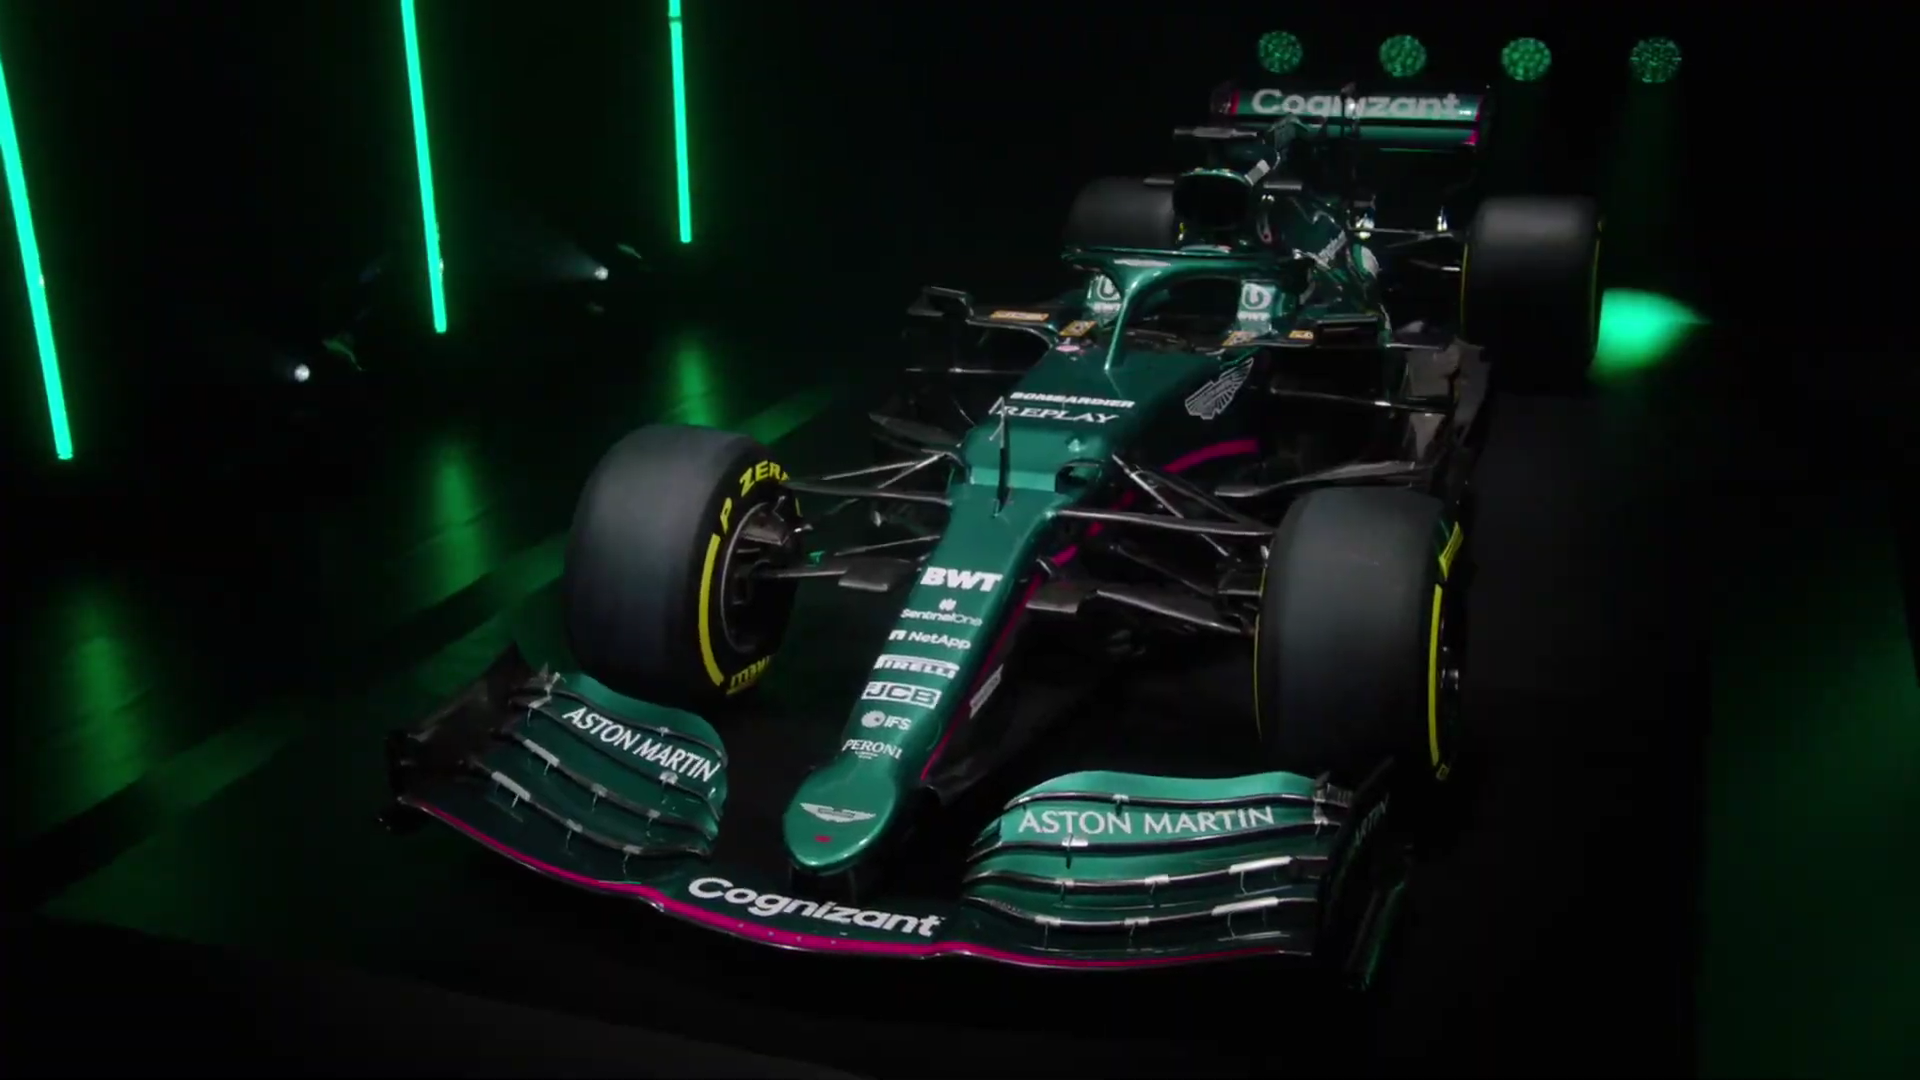 First picture: Aston Martin reveals its first F1 car for over 60 years F1 season